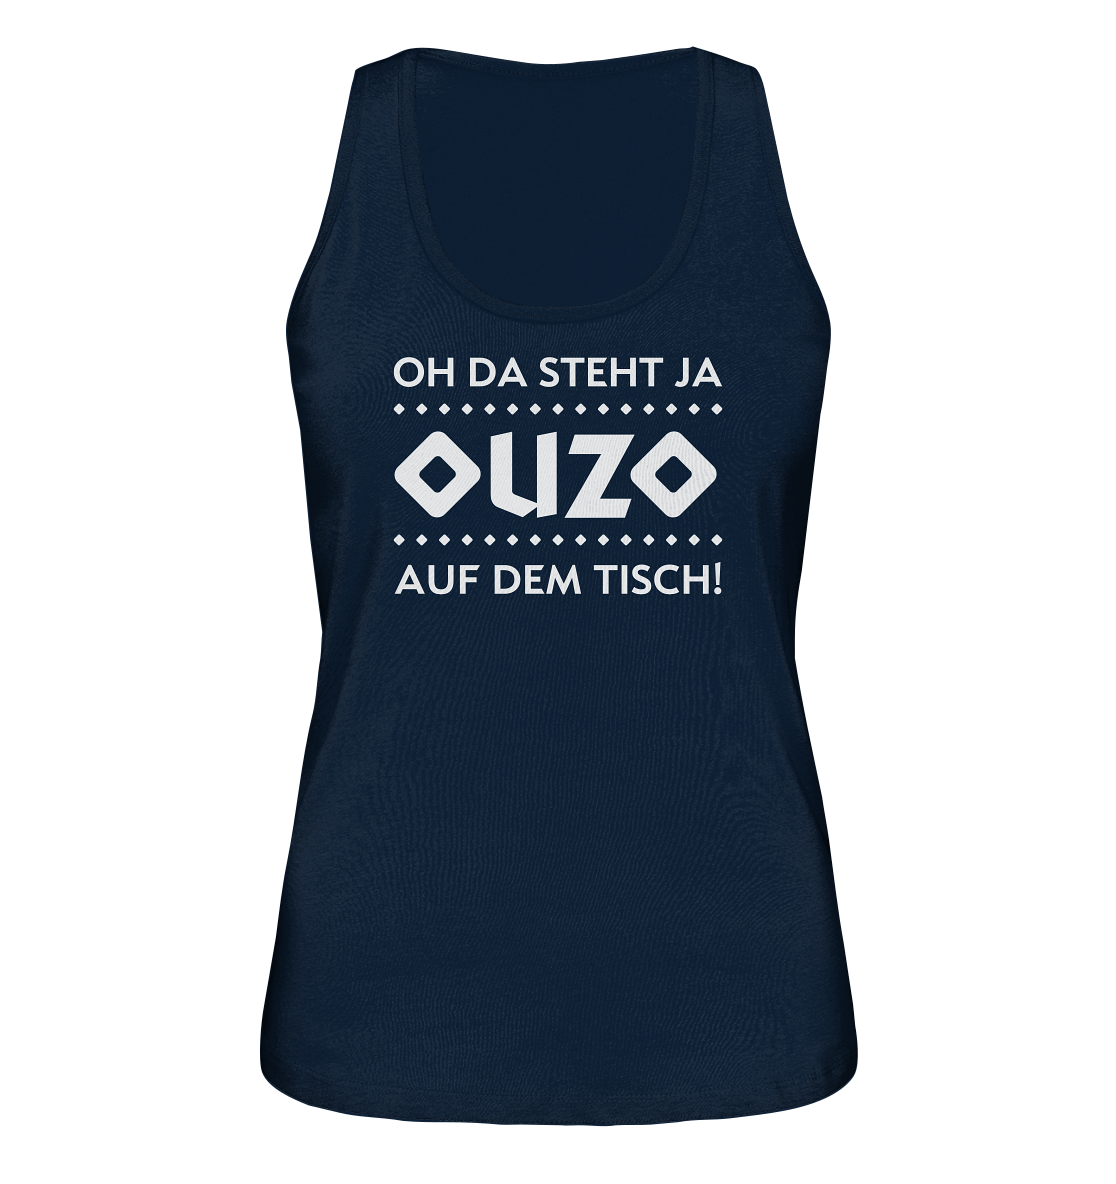 Oh, there’s ouzo on the table! - Ladies organic tank top